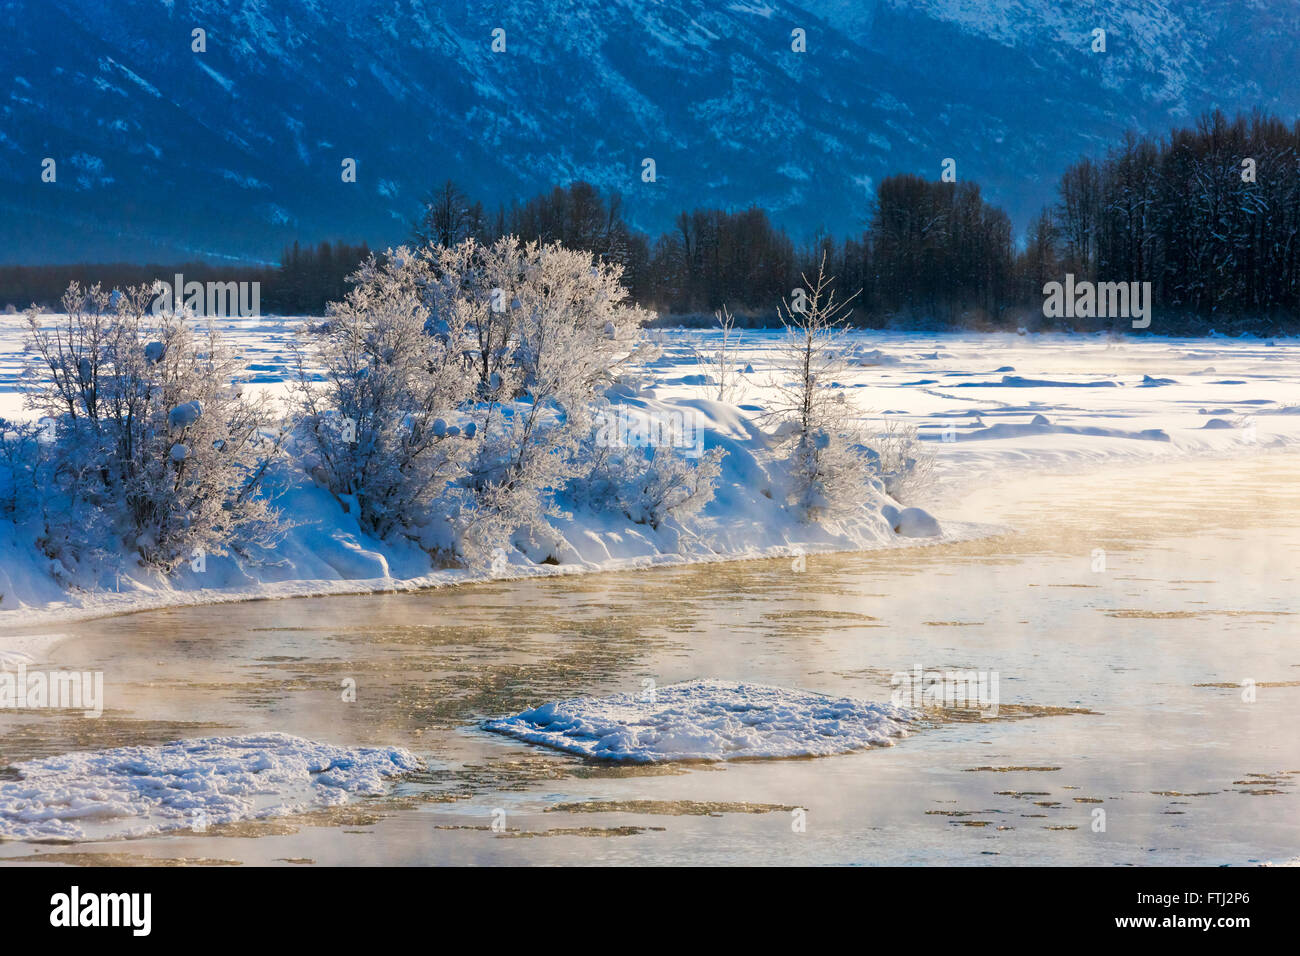 Landscape of river and forest covered with snow at sunset, Haines, Alaska, USA Stock Photo